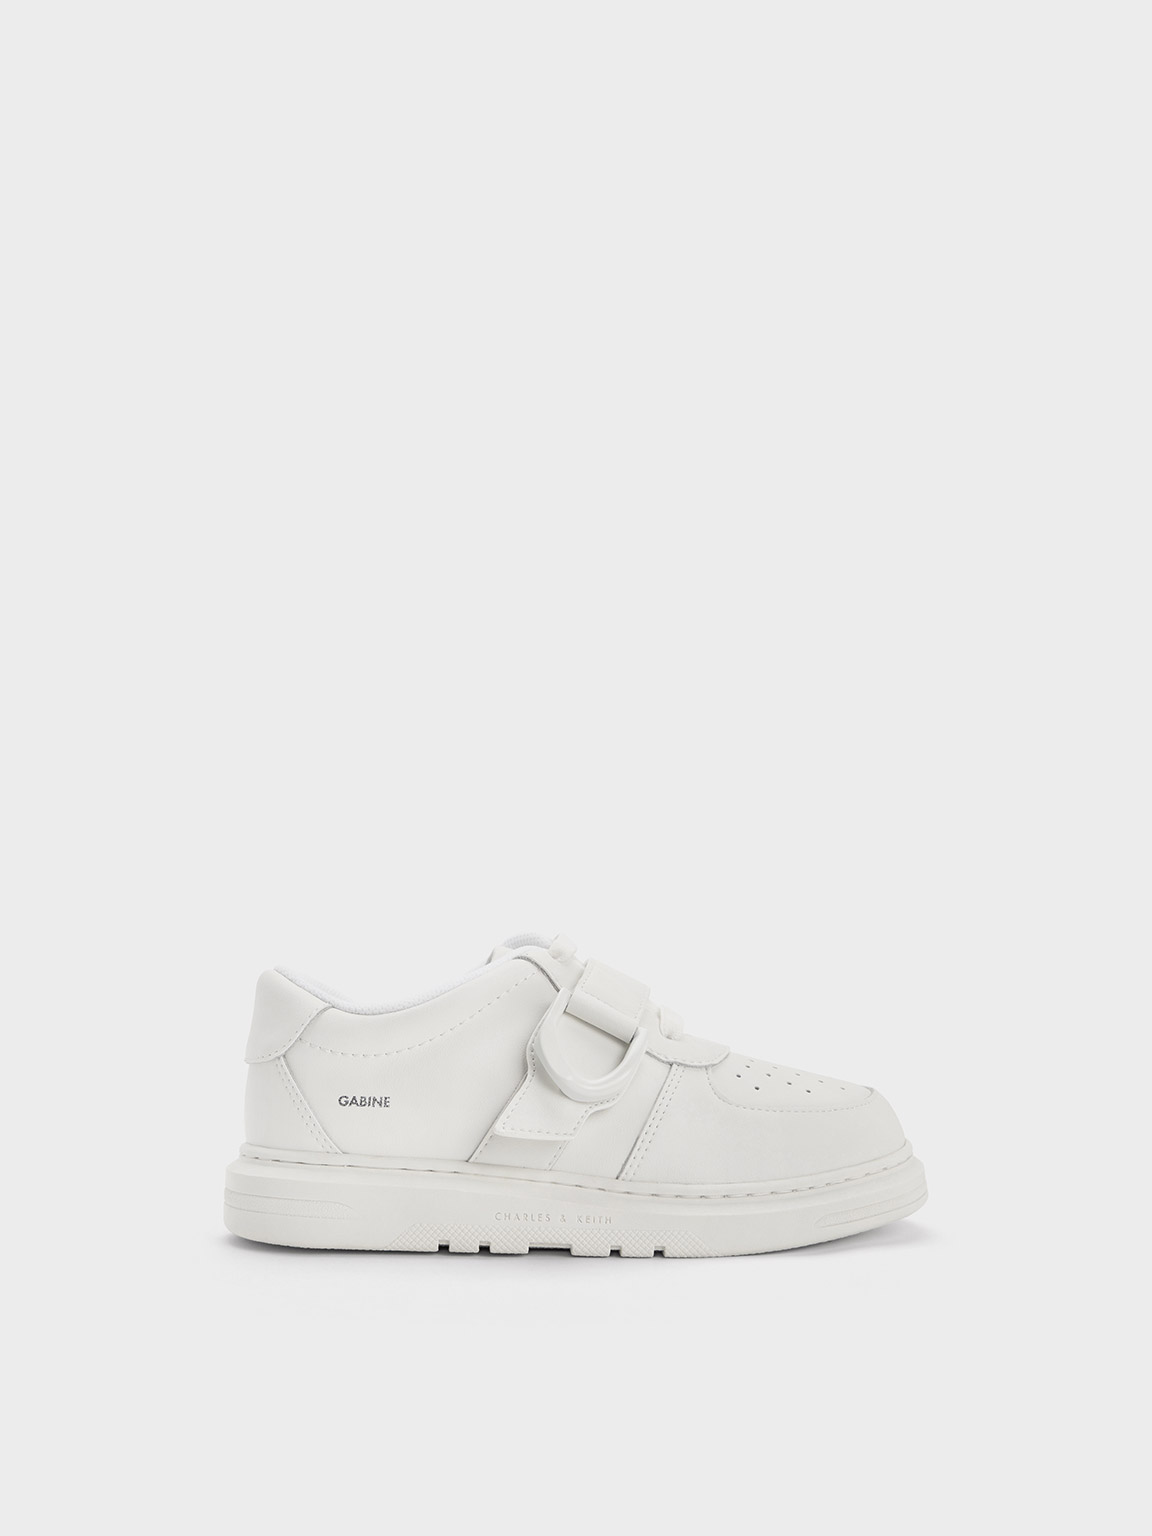 Charles & Keith - Girls' Gabine Leather Low-top Sneaker In White